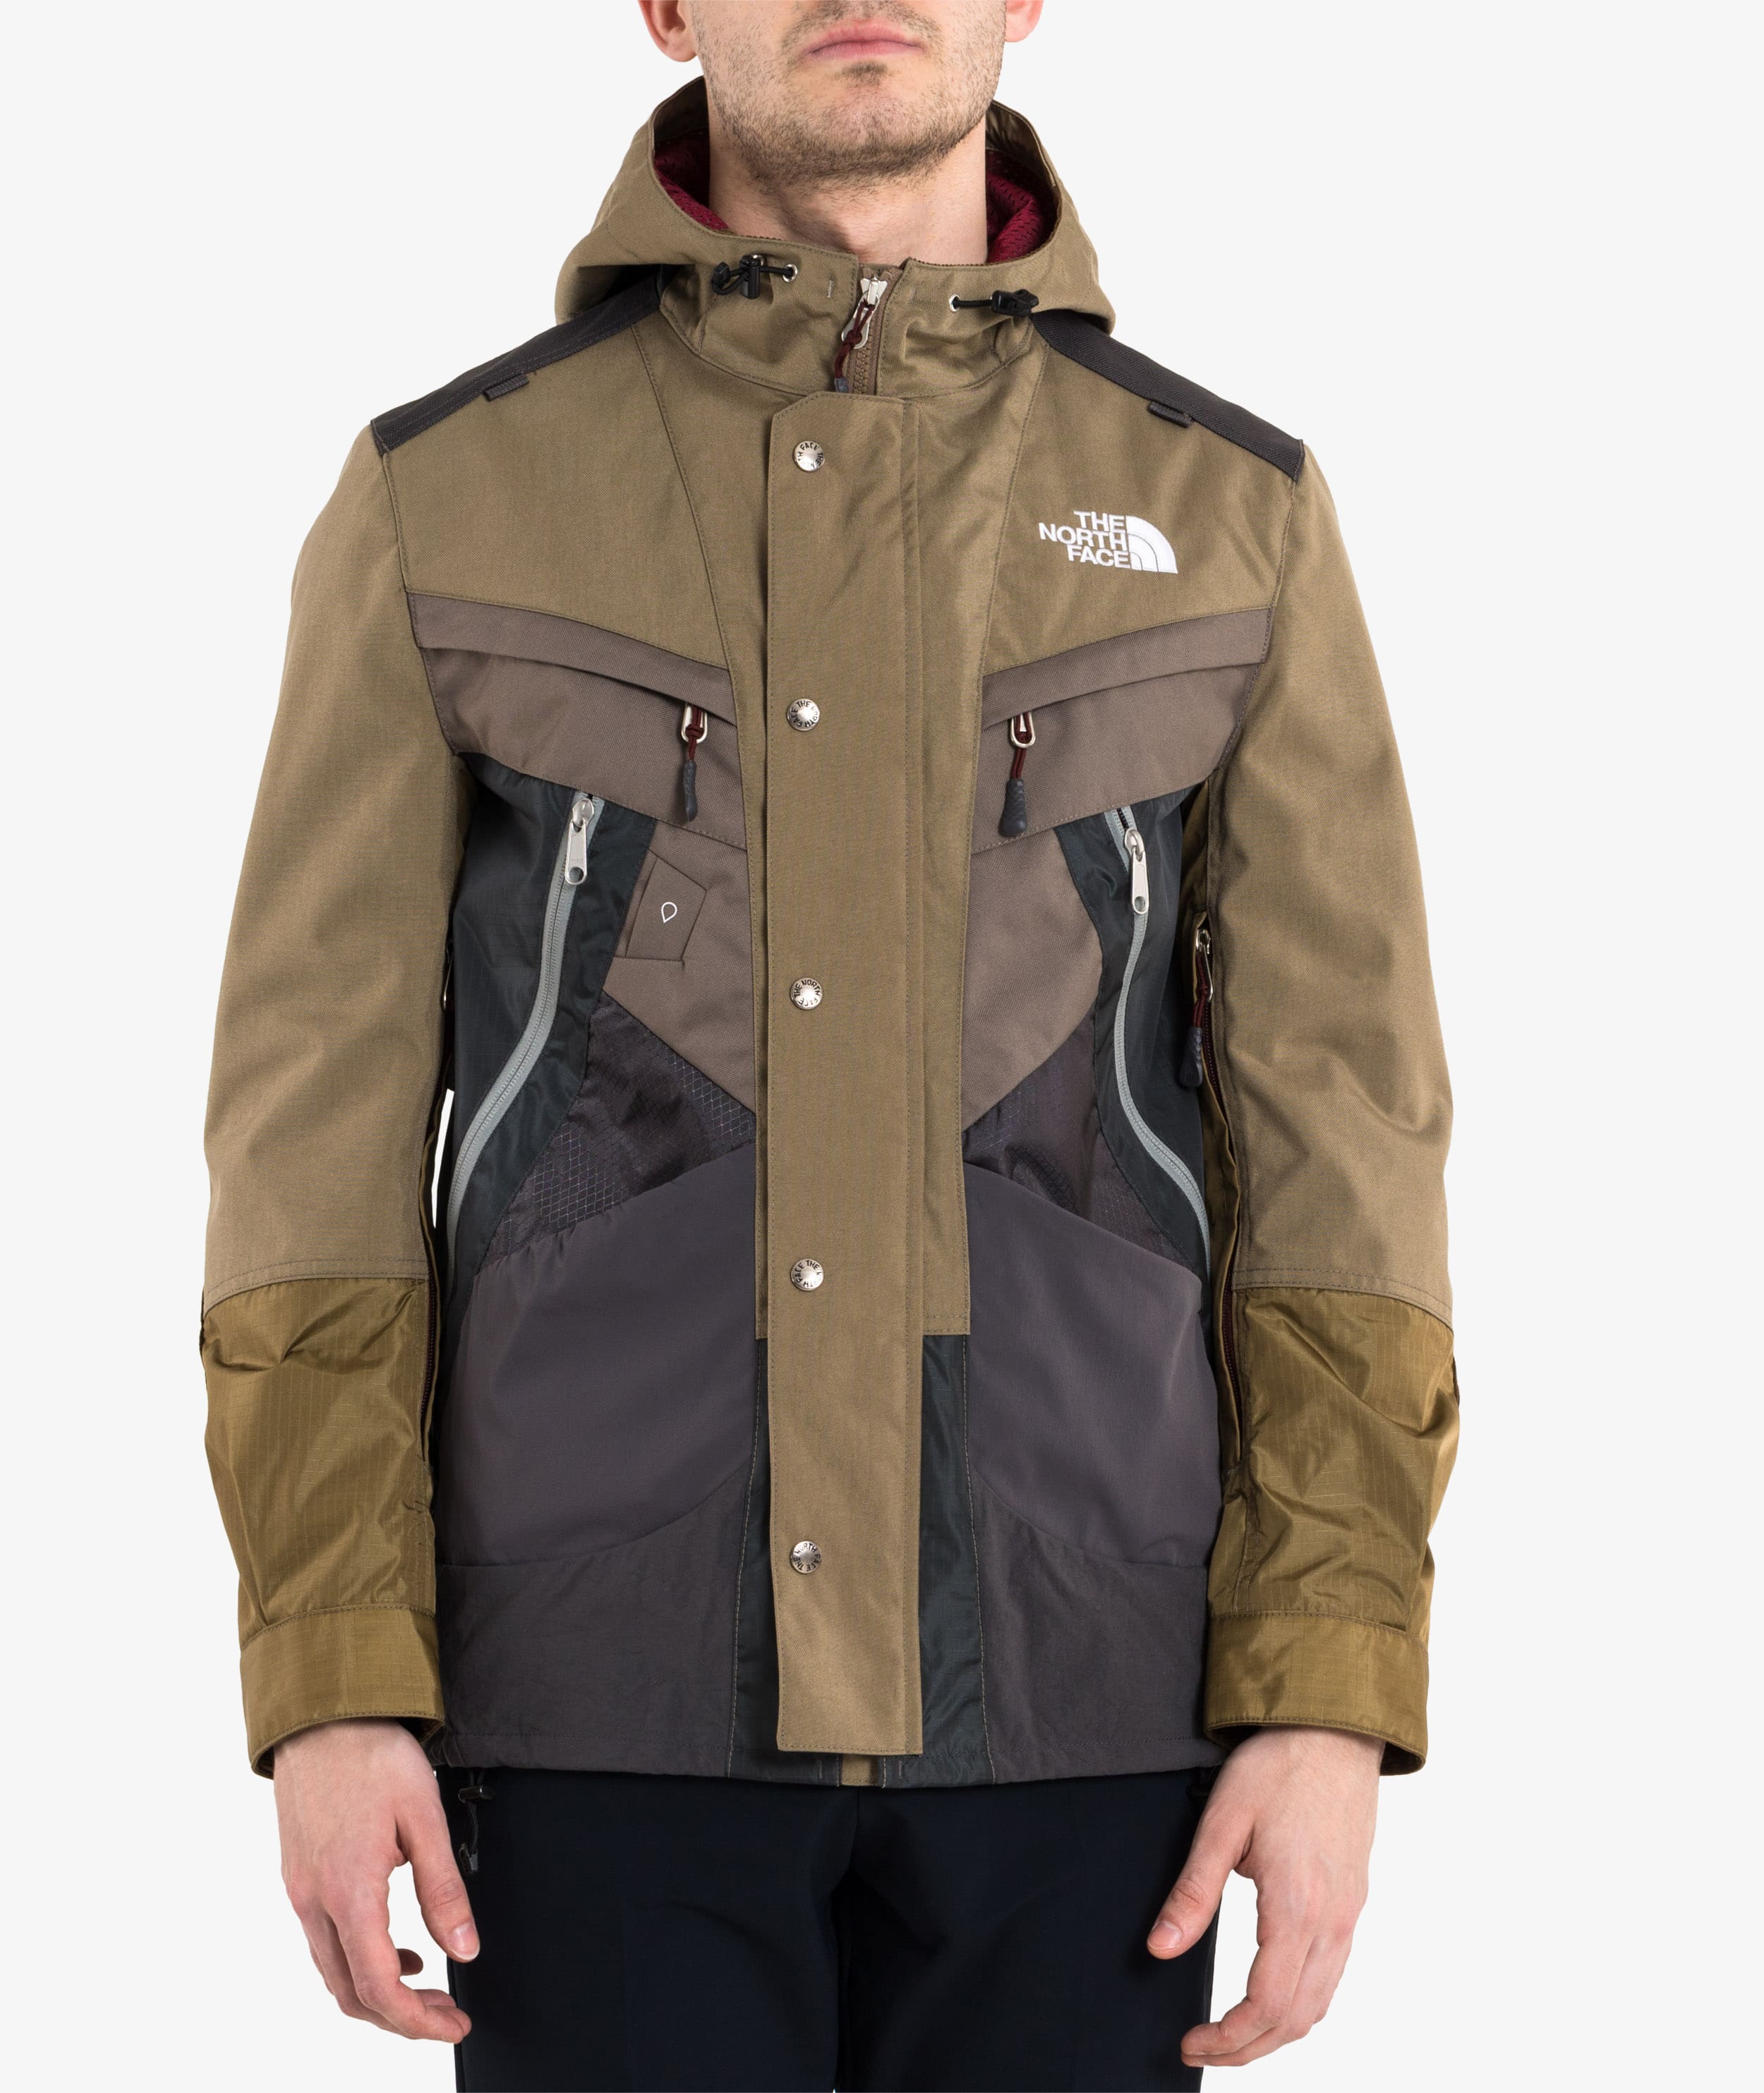 Got $2500 For A Jacket? - Soldier Systems Daily